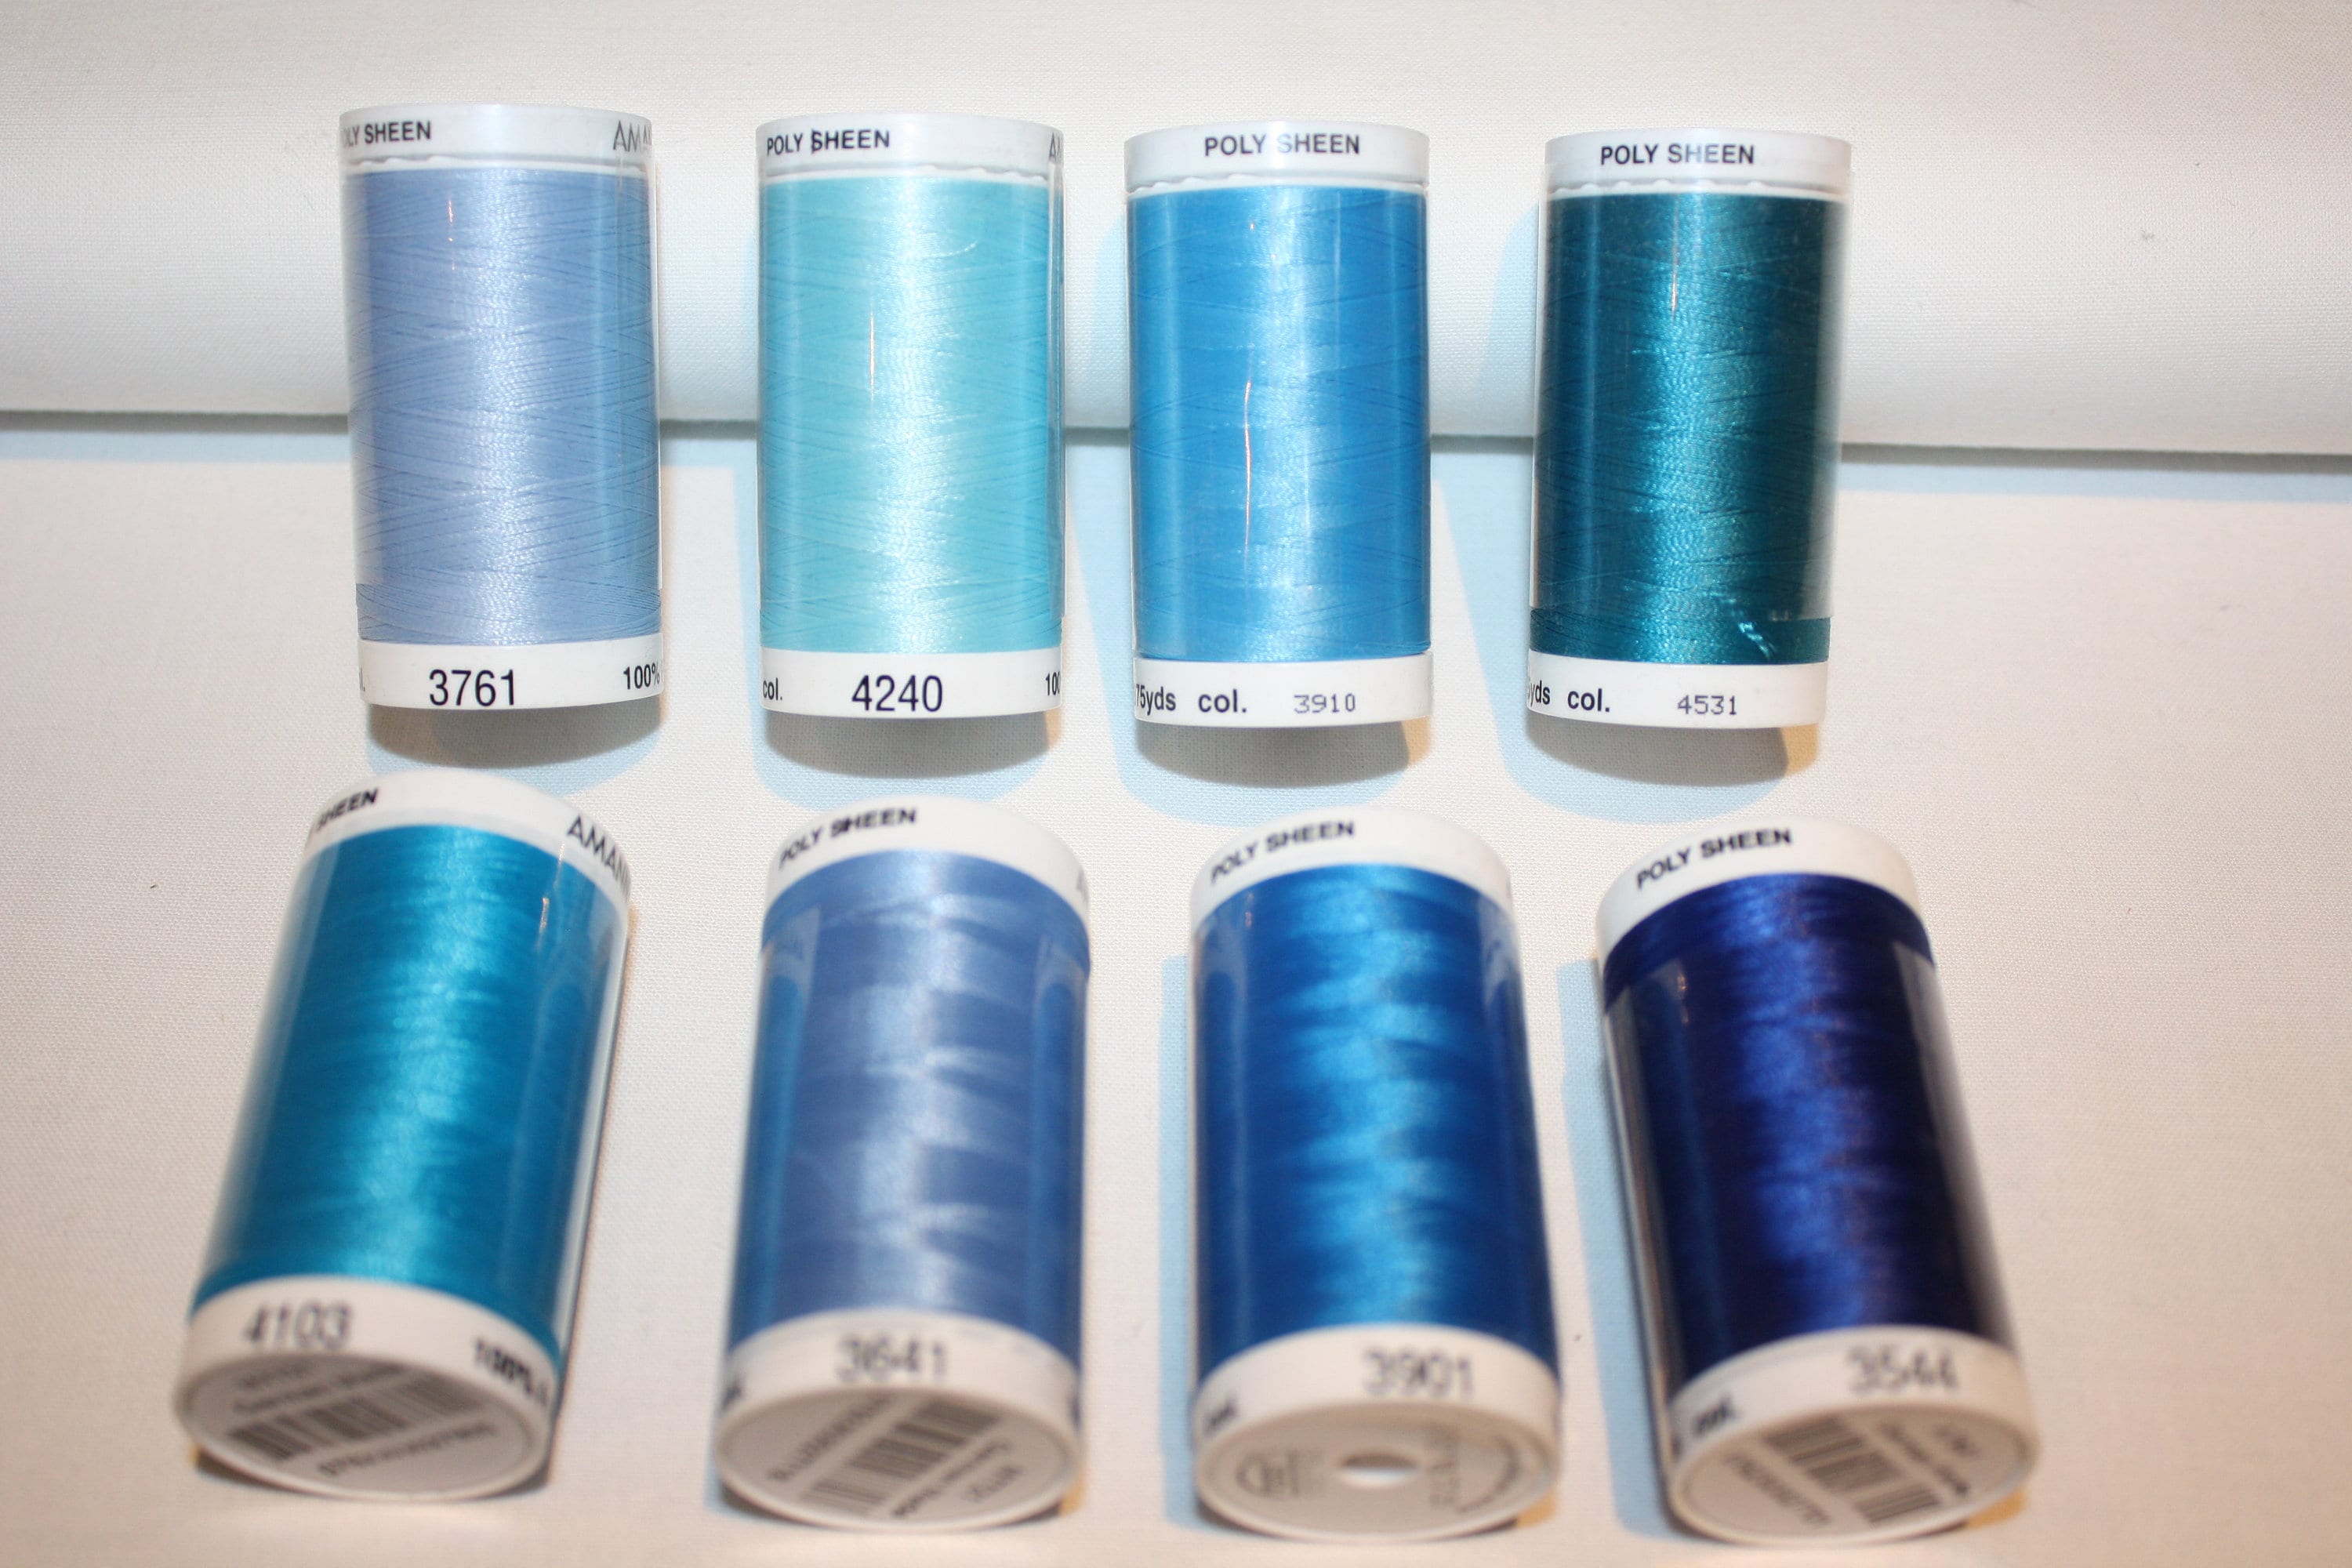 Polyester Machine Embroidery Thread Set 20 Pastel Colors 1000m